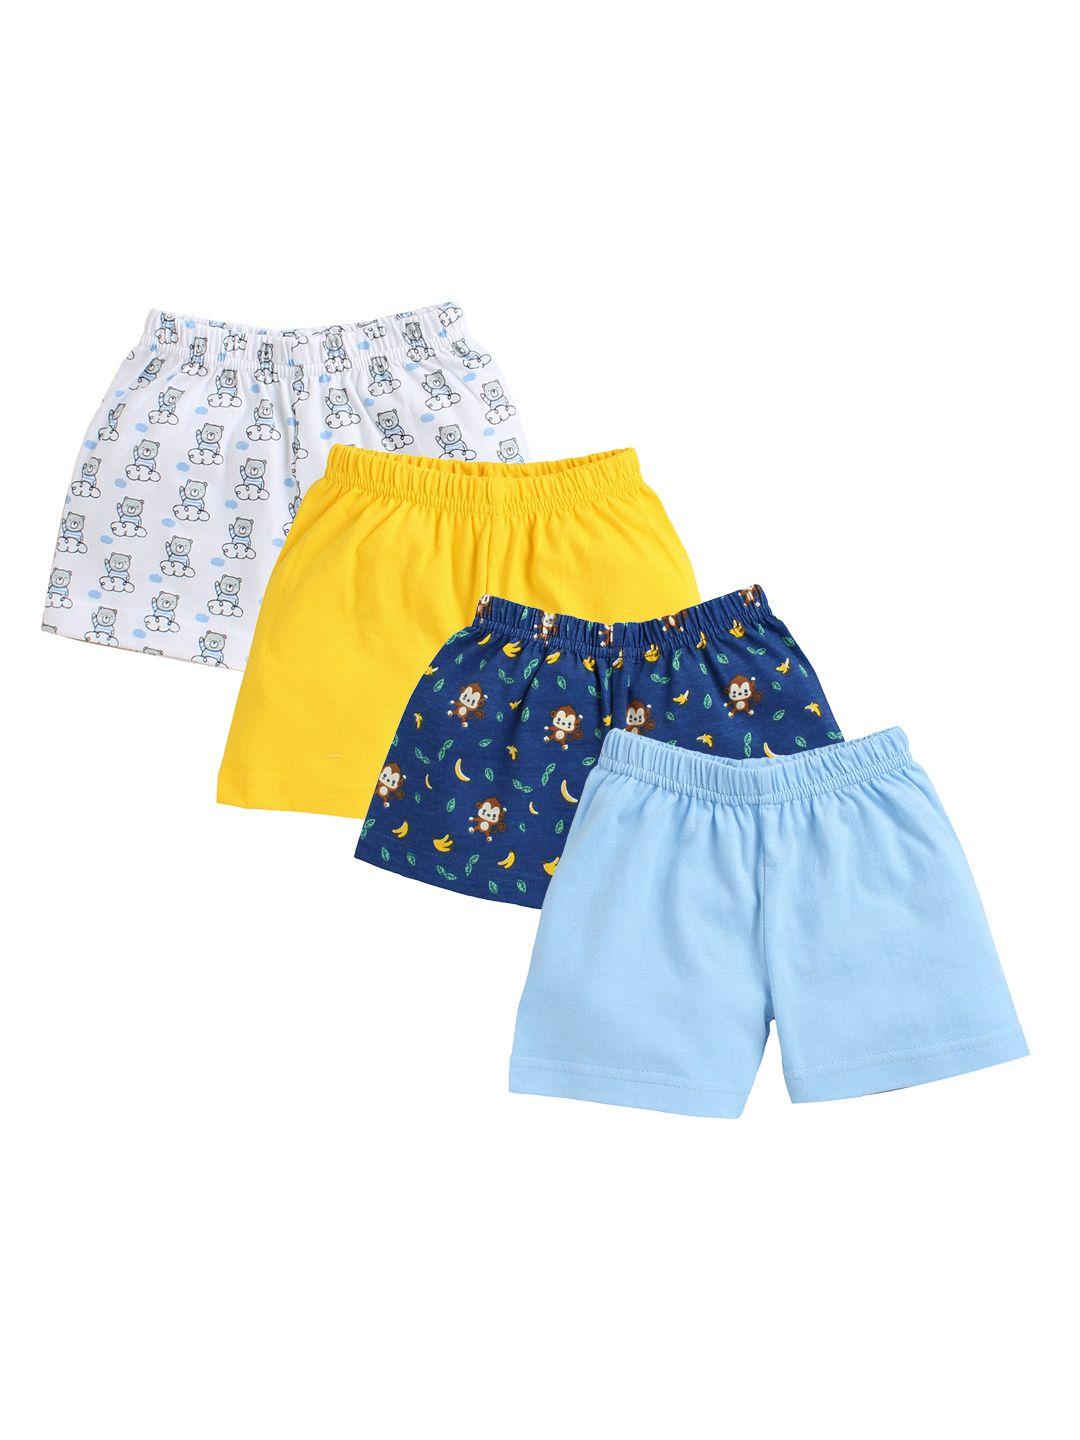 bumzee-boys-pack-of-4-cotton-shorts